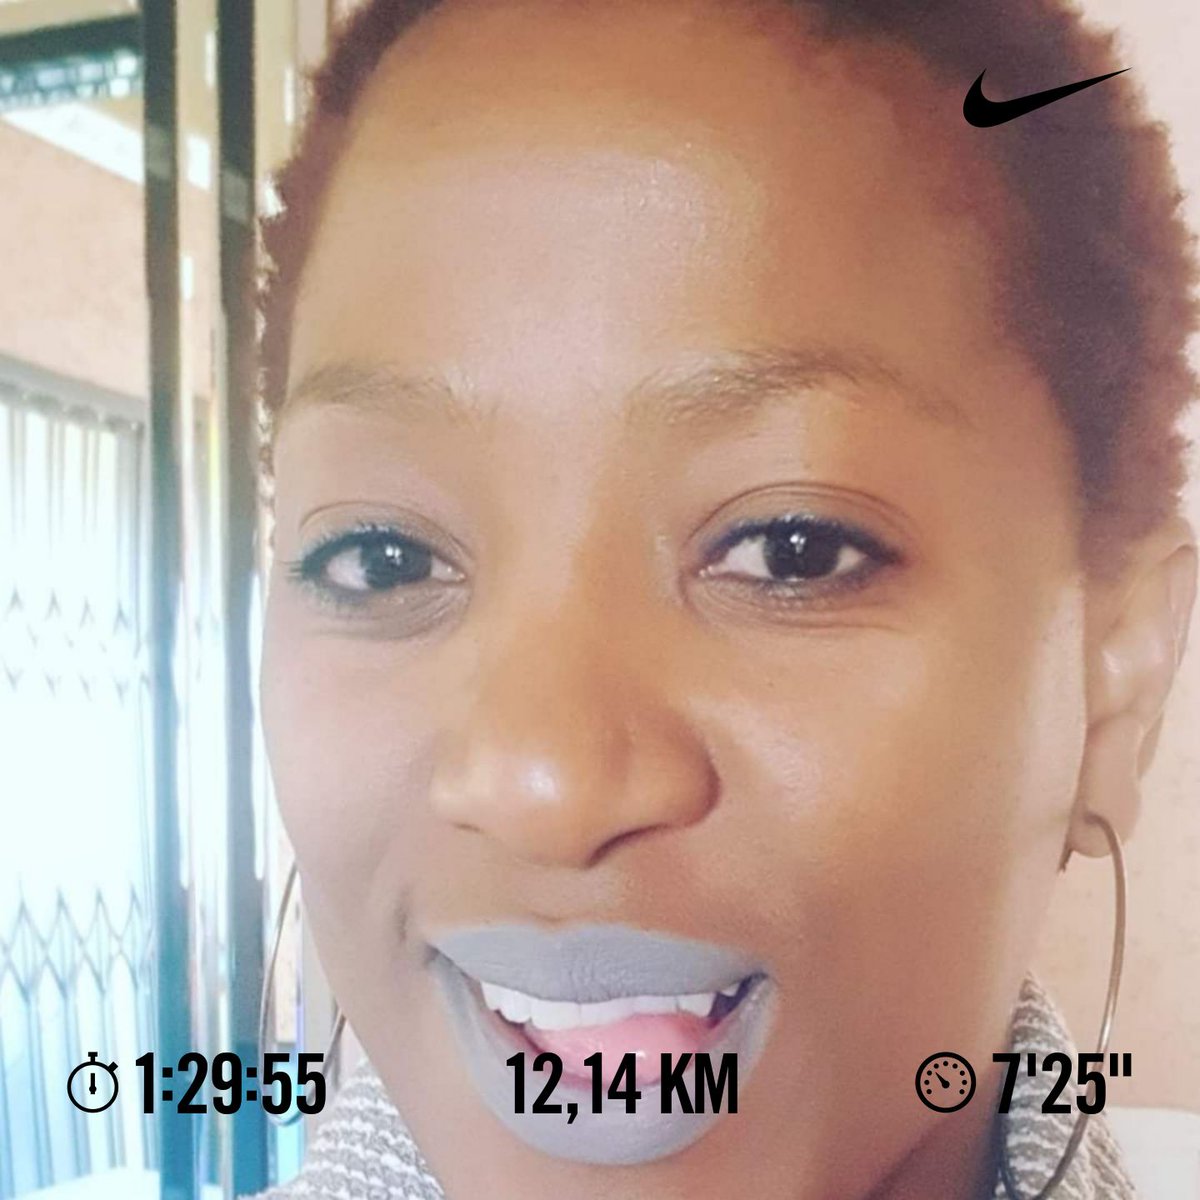 Holiday run done and dusted...🏃‍♀️🏃‍♀️
#RunningWithTumiSole 
#Finishing2020Healthy